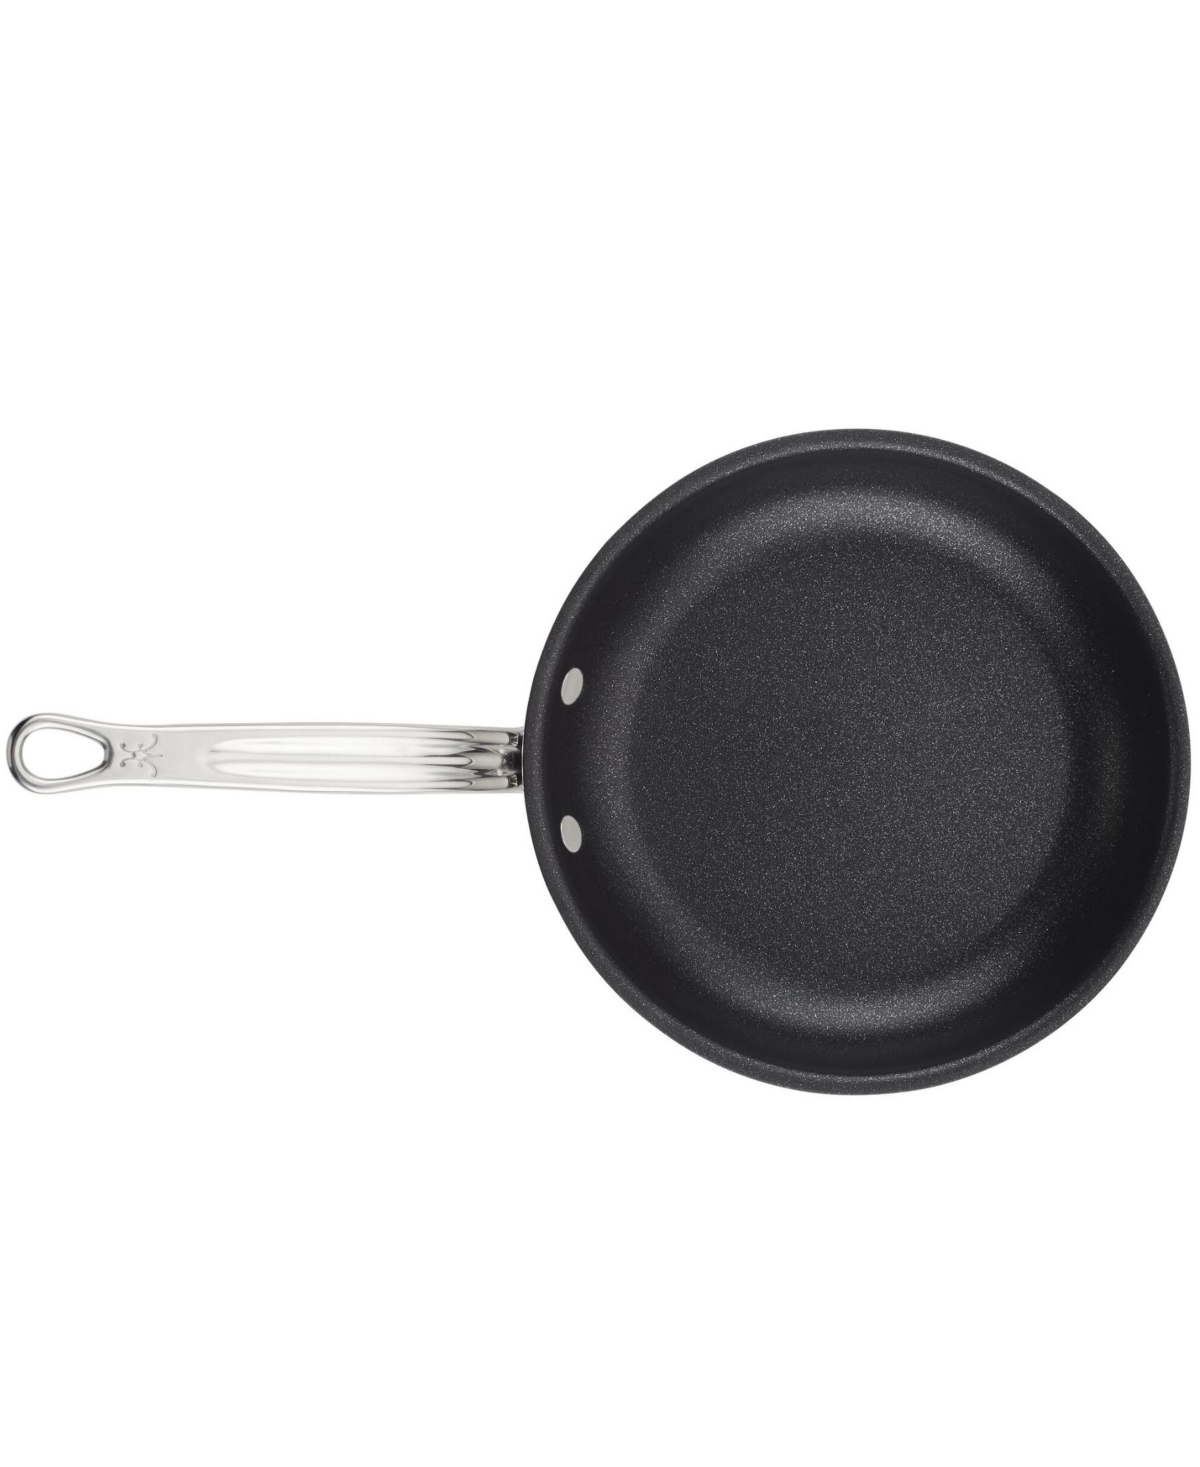 Shop Hestan Probond Clad Stainless Steel With Titum Nonstick 8.5" Open Skillet In Silver